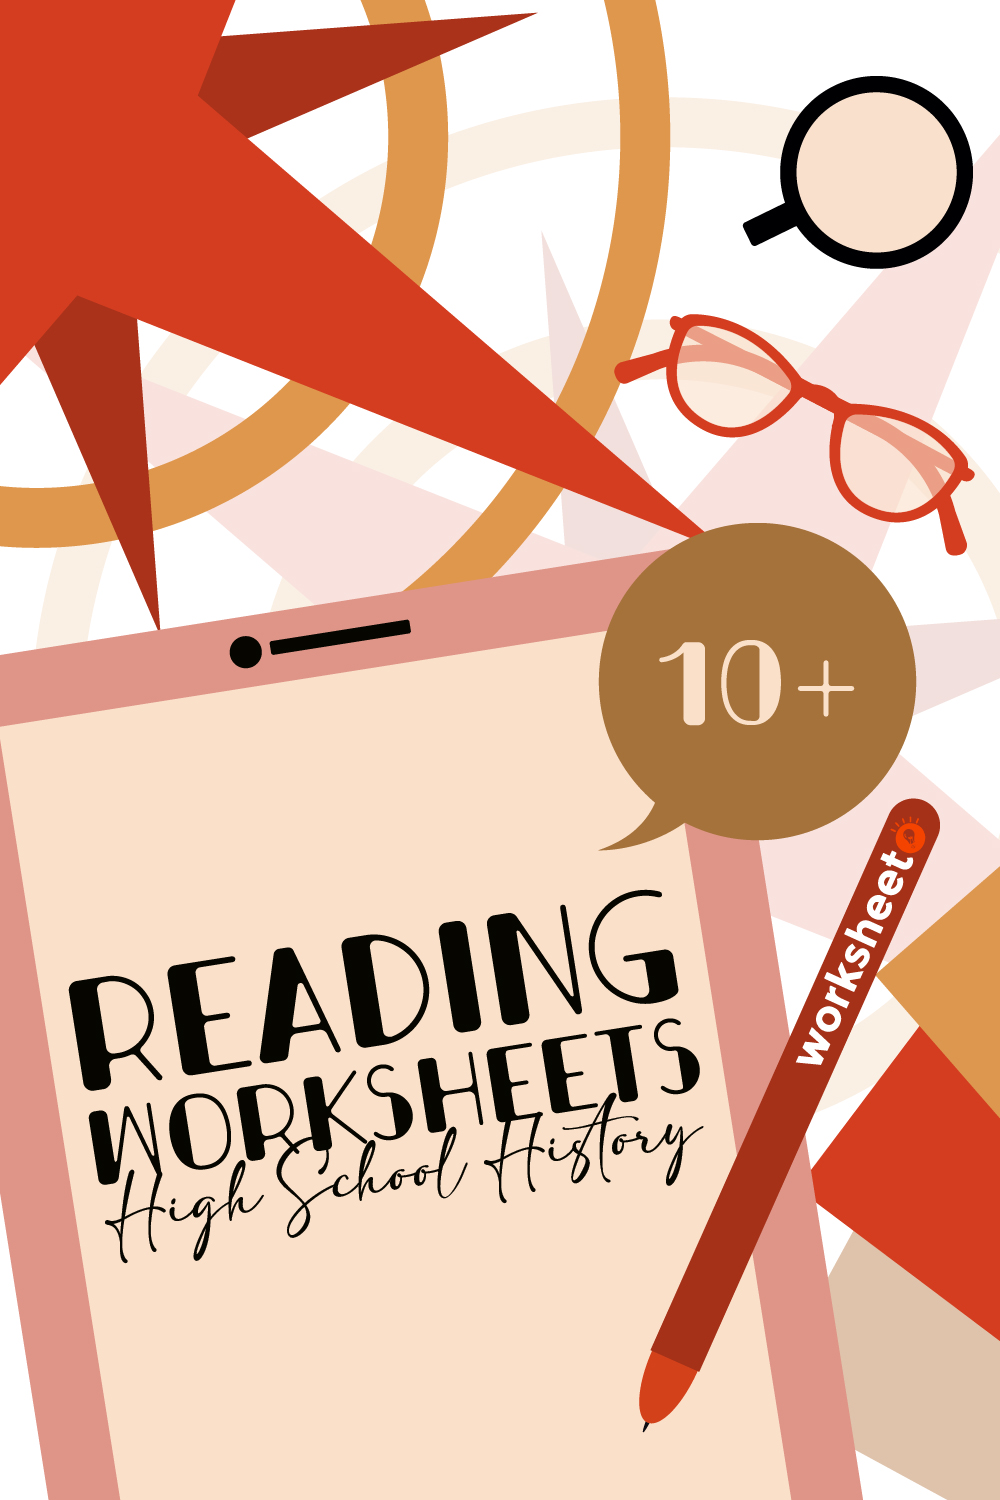 10 Images of Reading Worksheets High School History